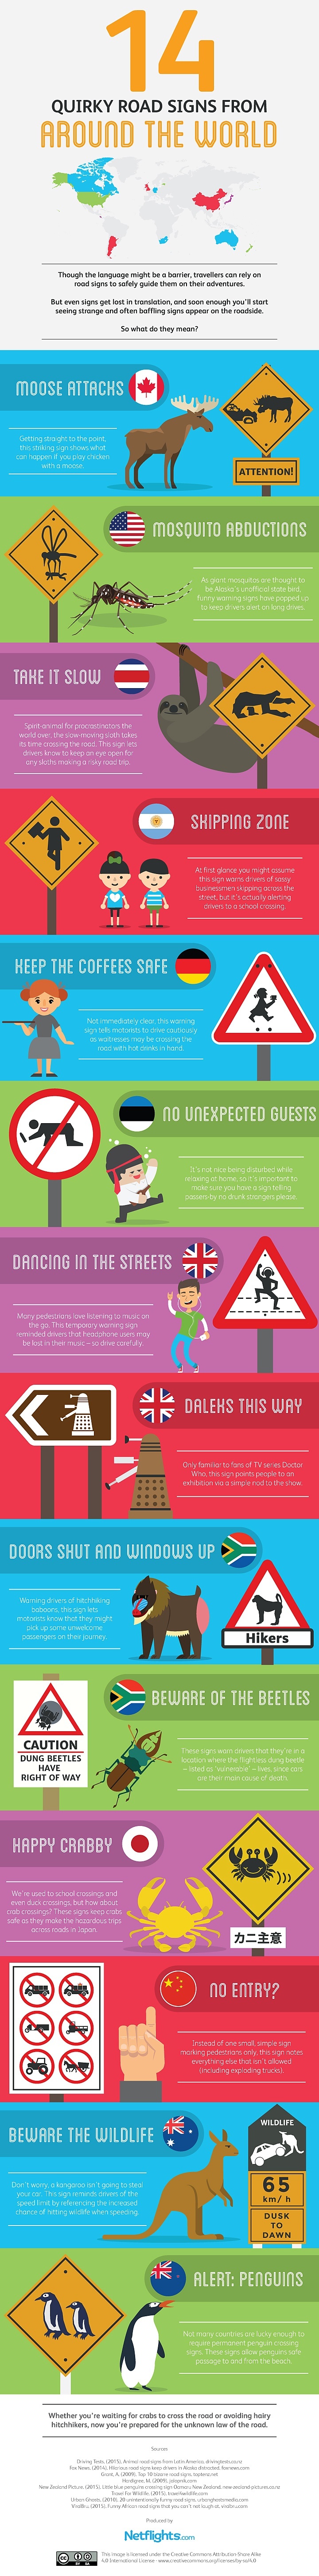 14 Quirky Road Signs From Around The World - Infographic